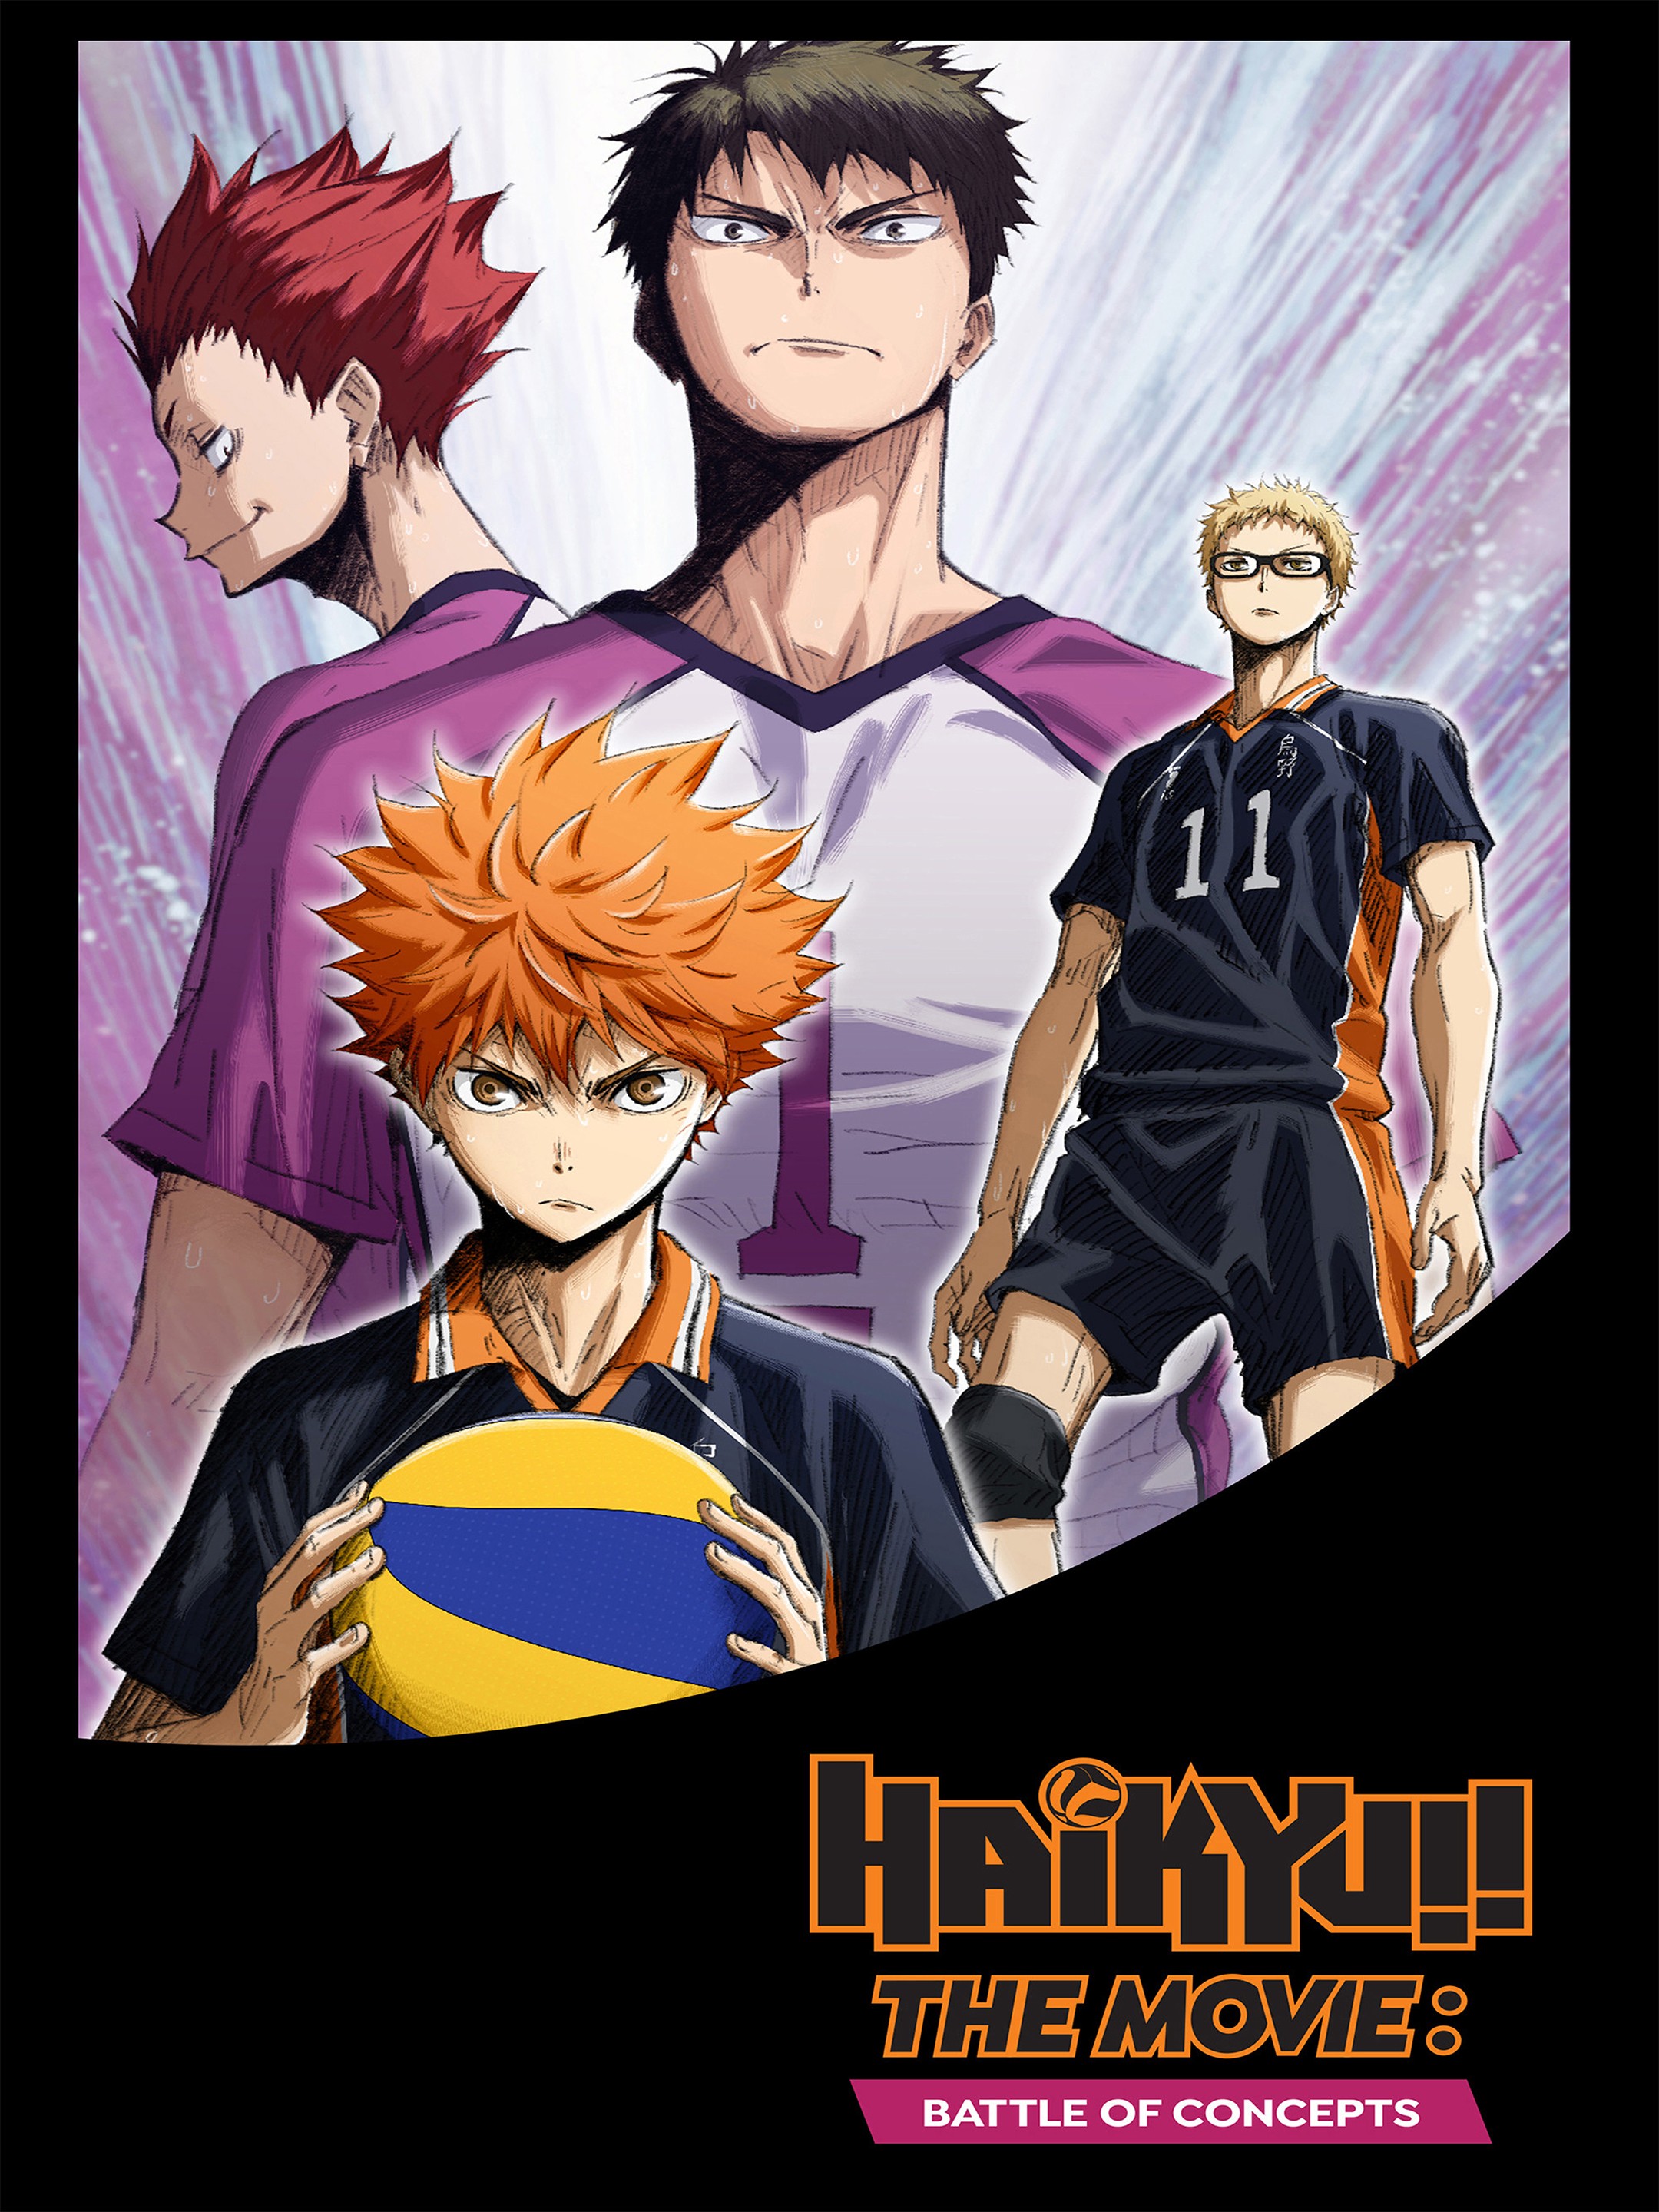 Haikyu movie announced, anime will end with two-part film instead of S5